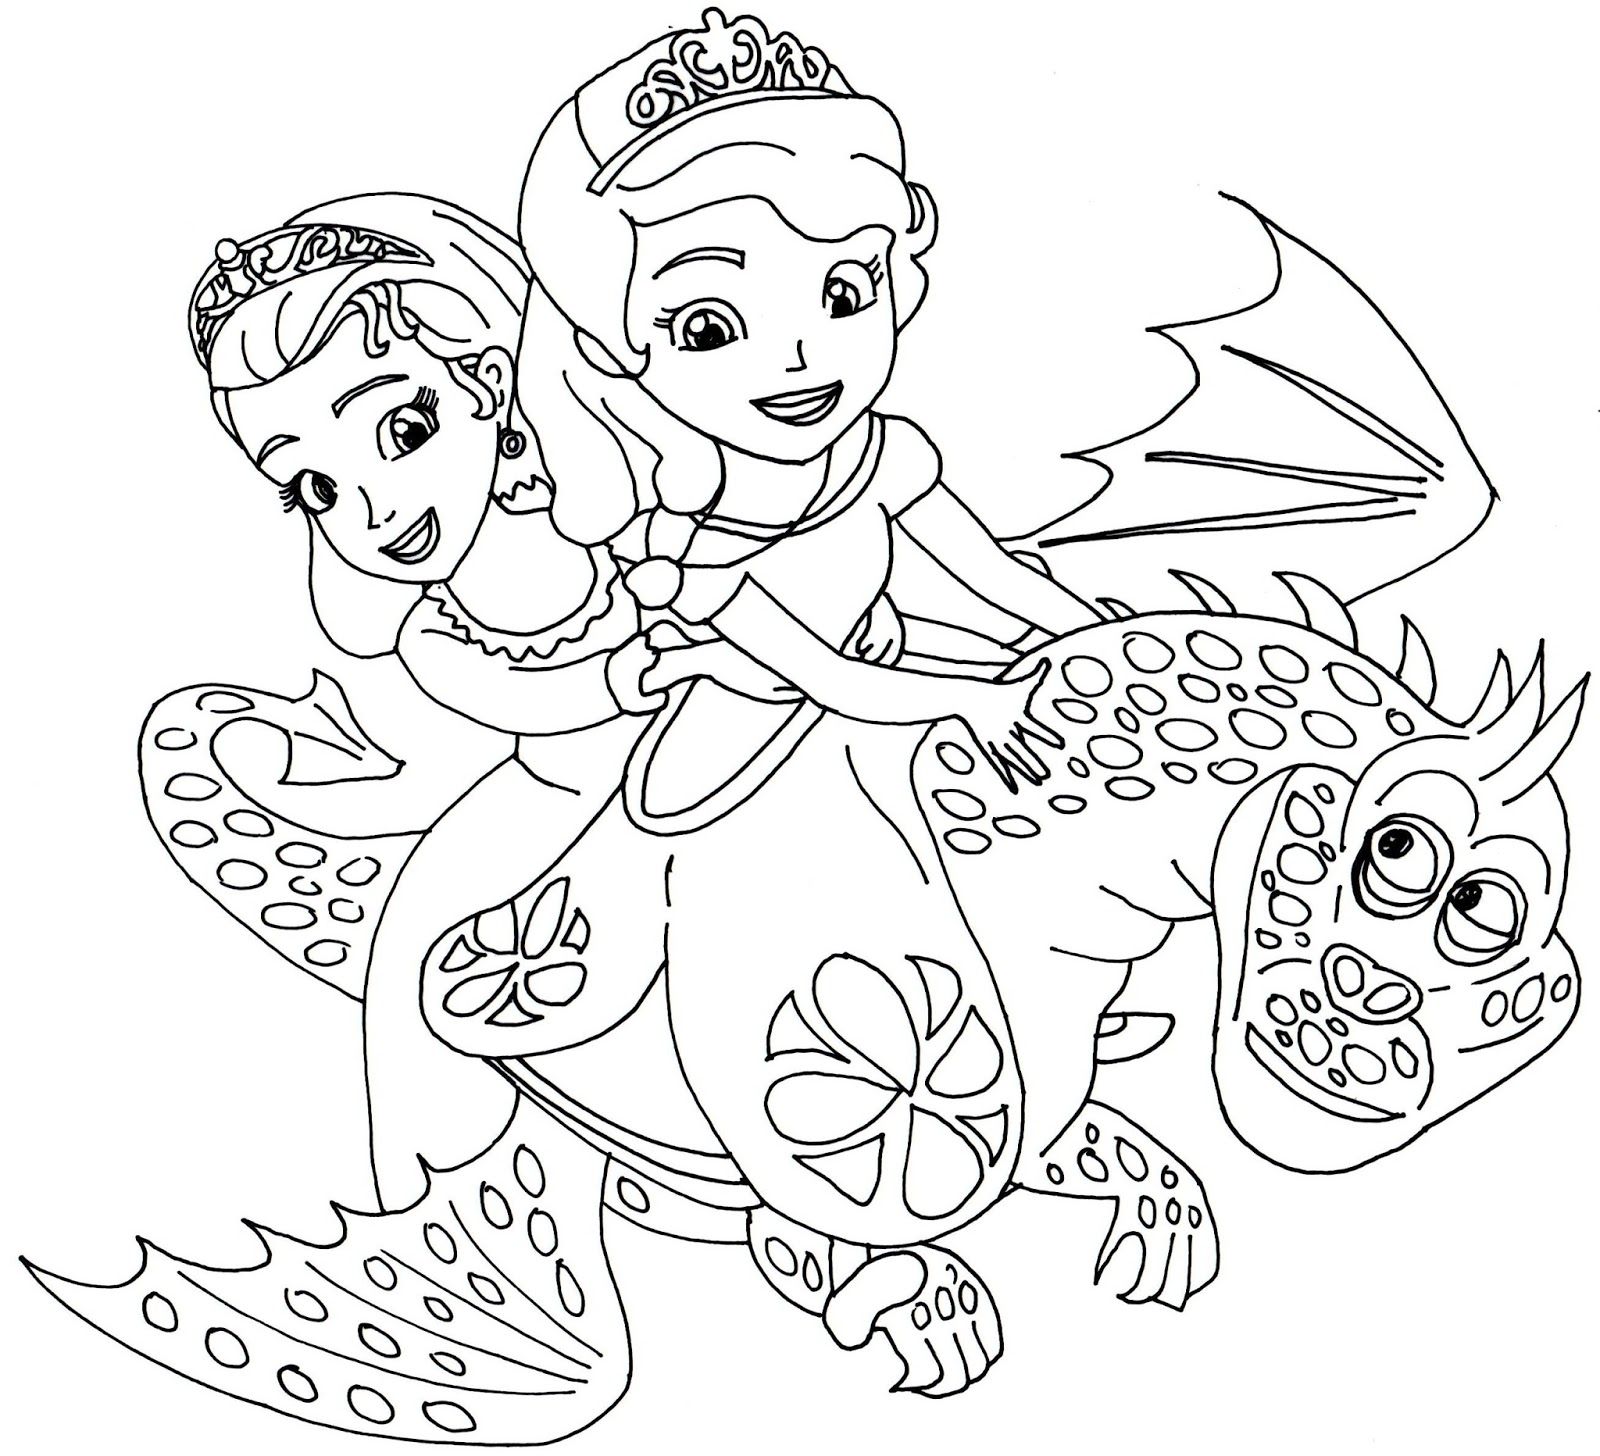 free-sofia-the-first-printable-coloring-pages-download-free-sofia-the